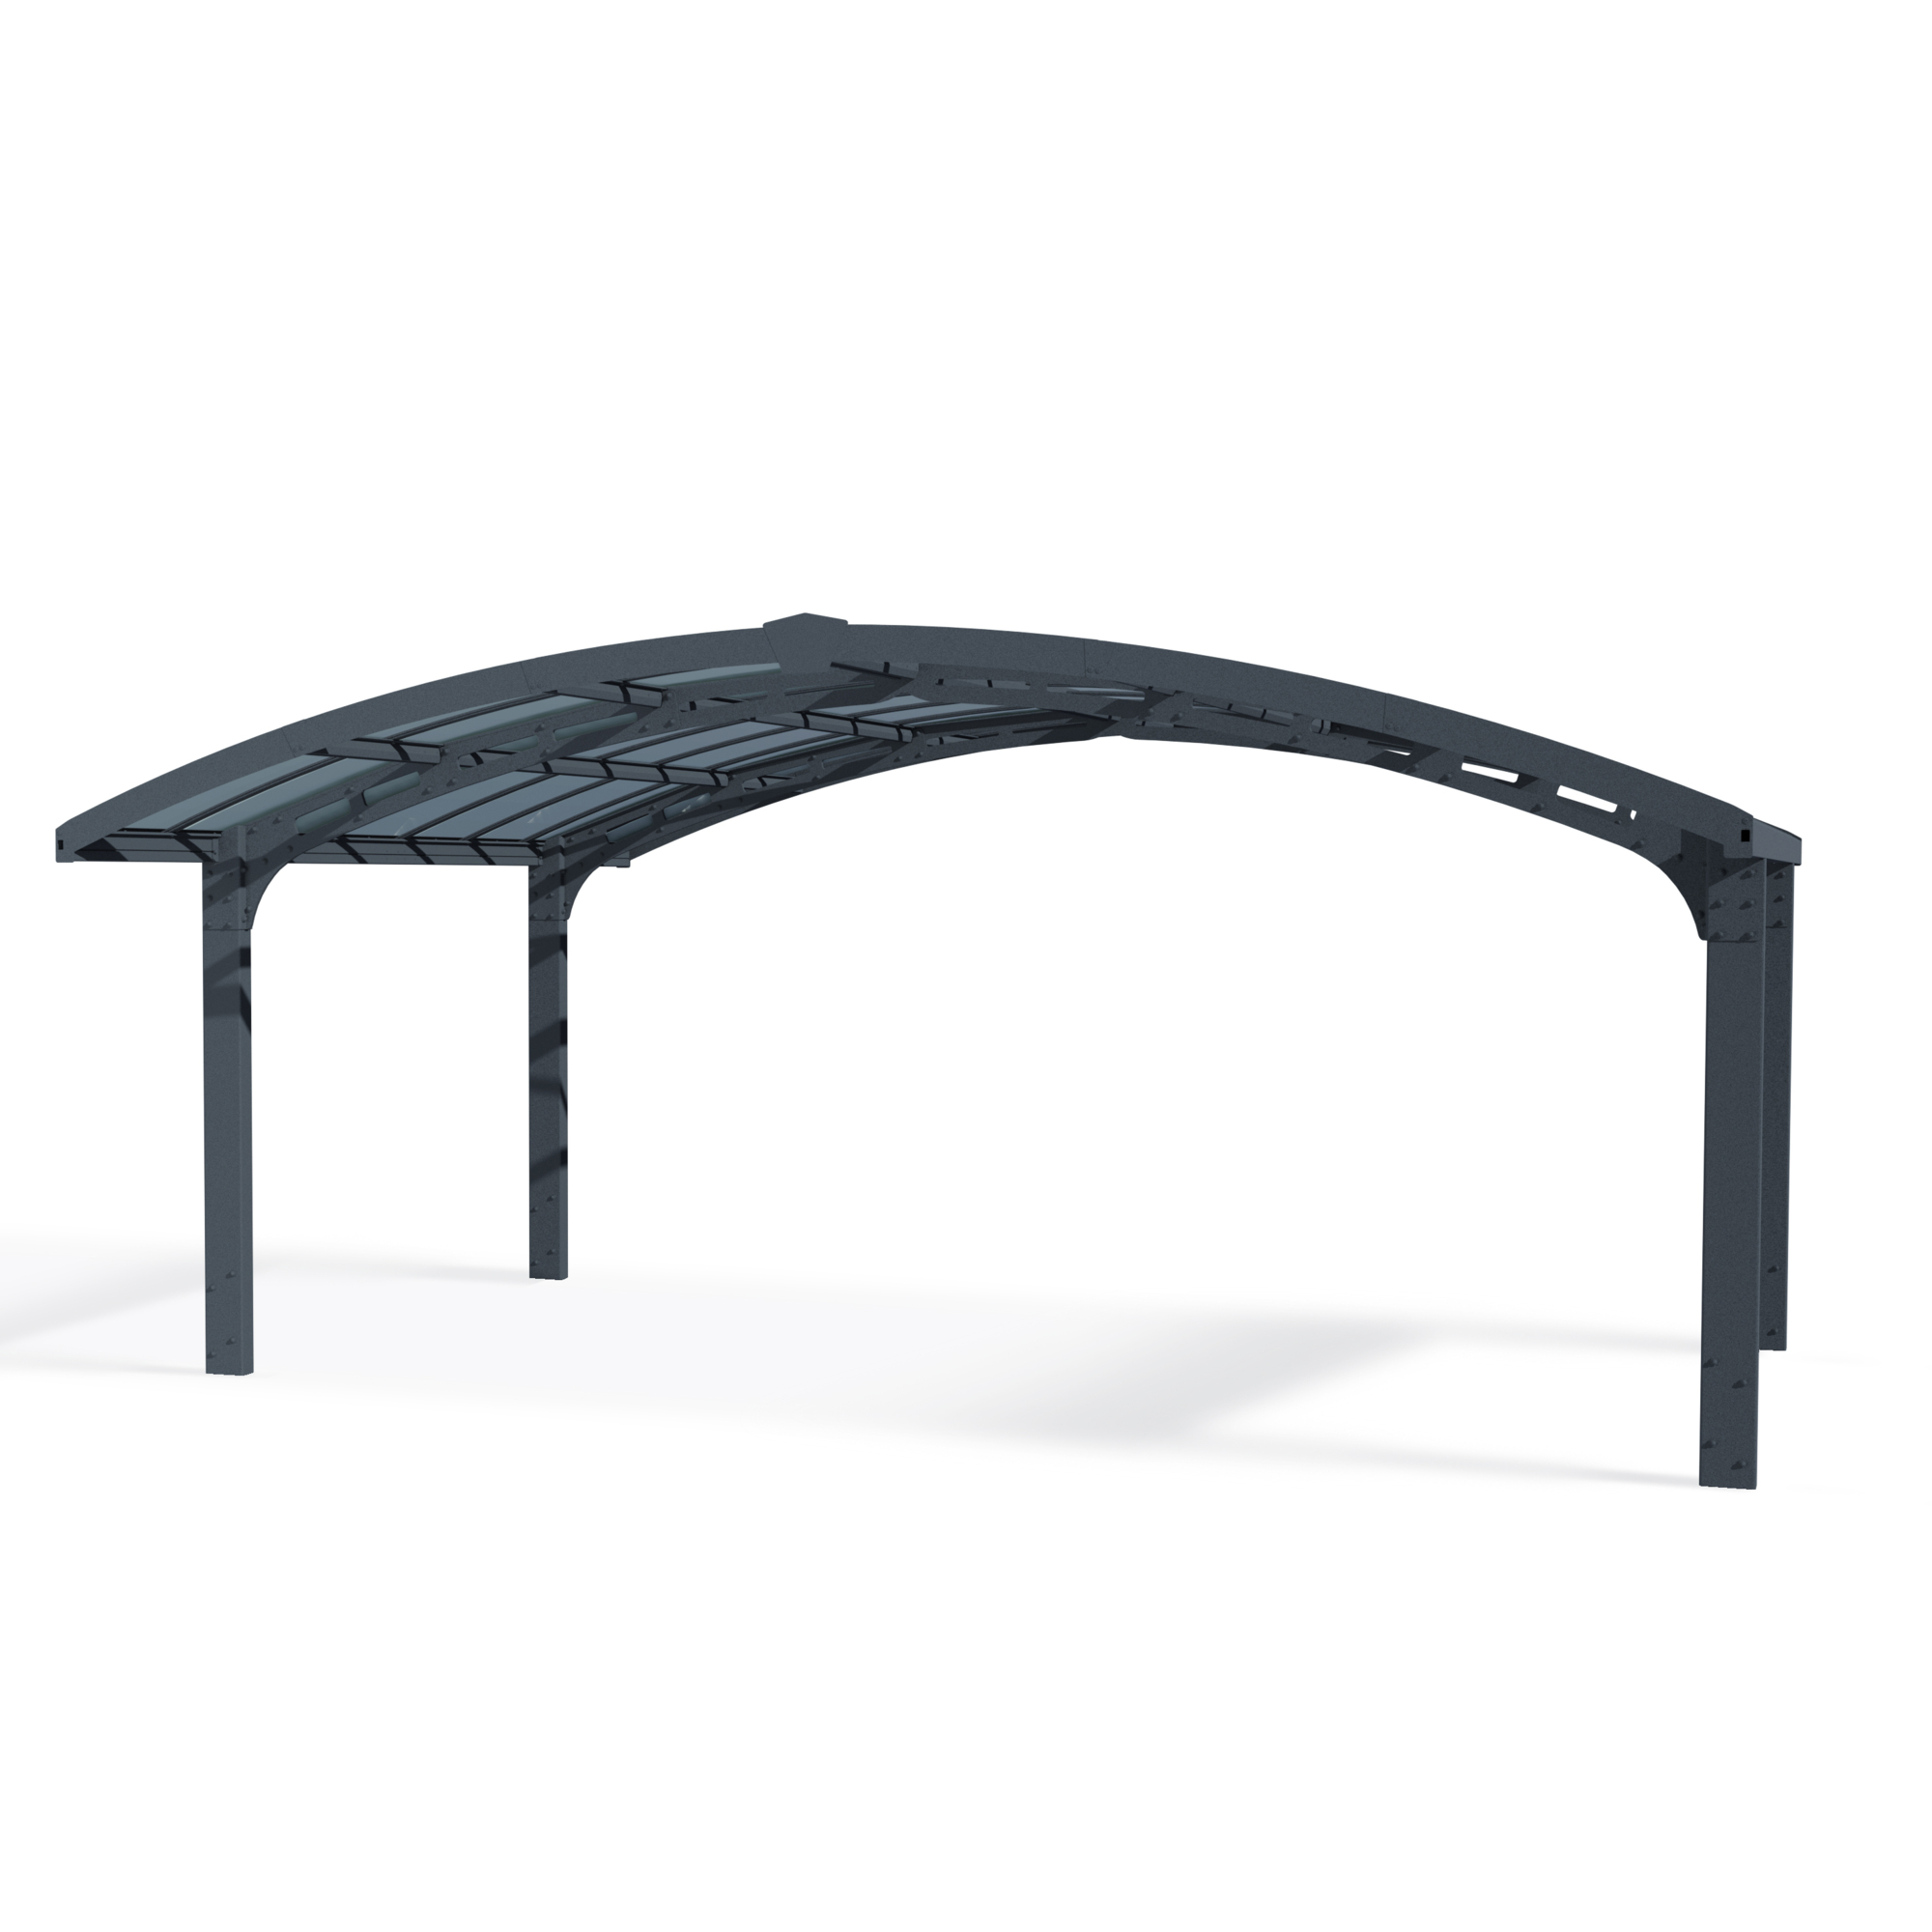 Poly-Tex Inc., Canopia Arizona Breeze Double Carport Arch-Style, Width 118 in, Height 118 in, Cover Material Polycarbonate, Model 704987